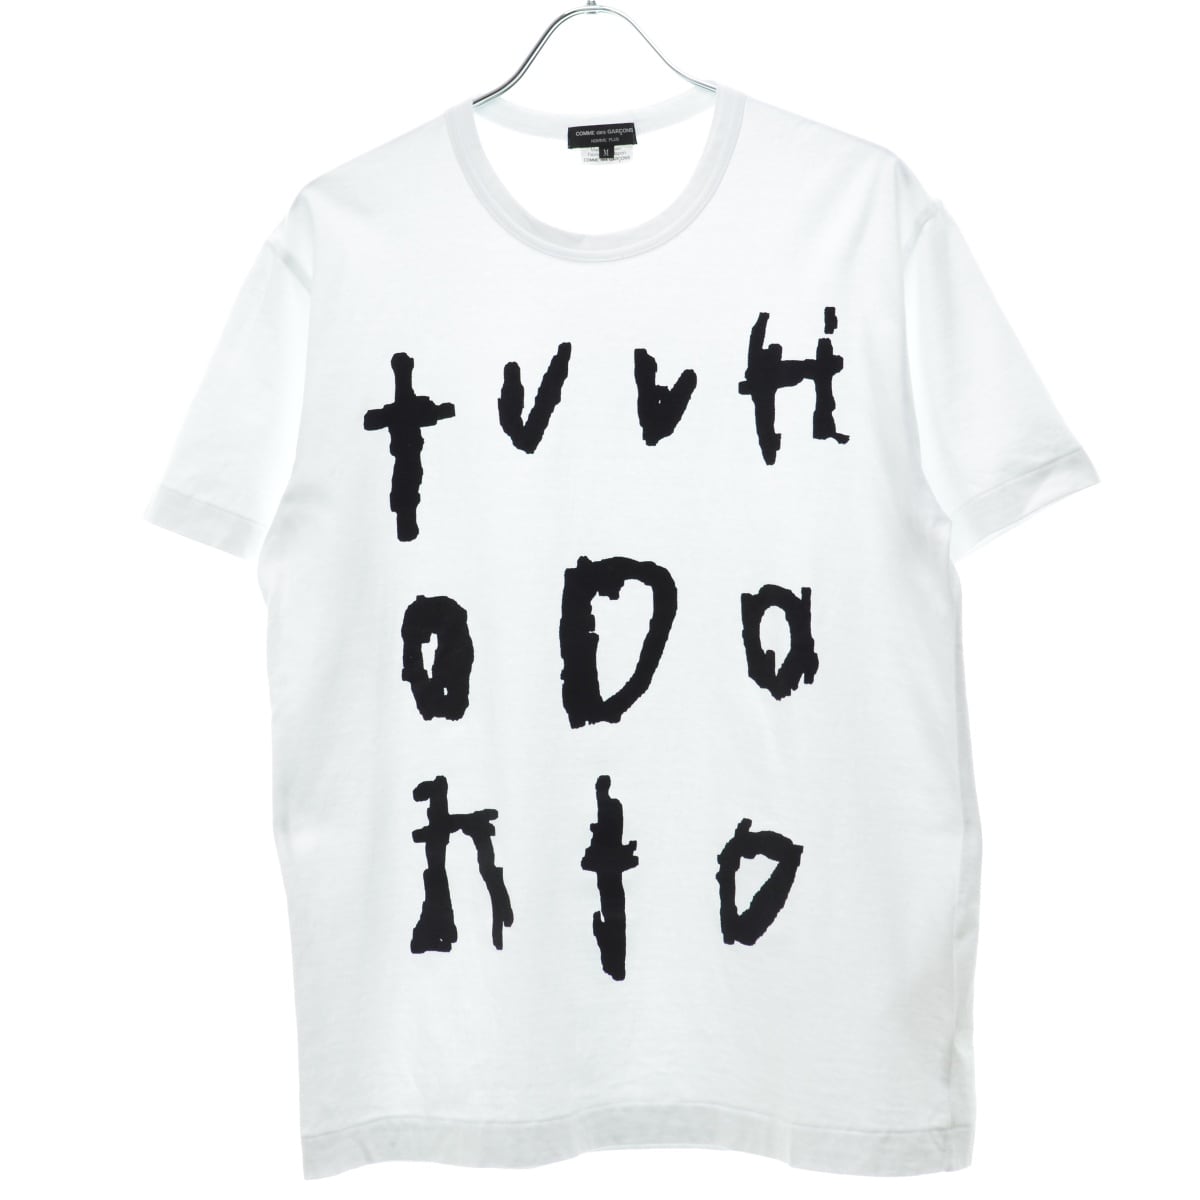 COMME des GARCONS HOMME PLUS / コムデギャルソン オム プリュス 23AW AD2023 PL-T015 Edward  Goss半袖Tシャツ | カンフル京都裏寺店 powered by BASE